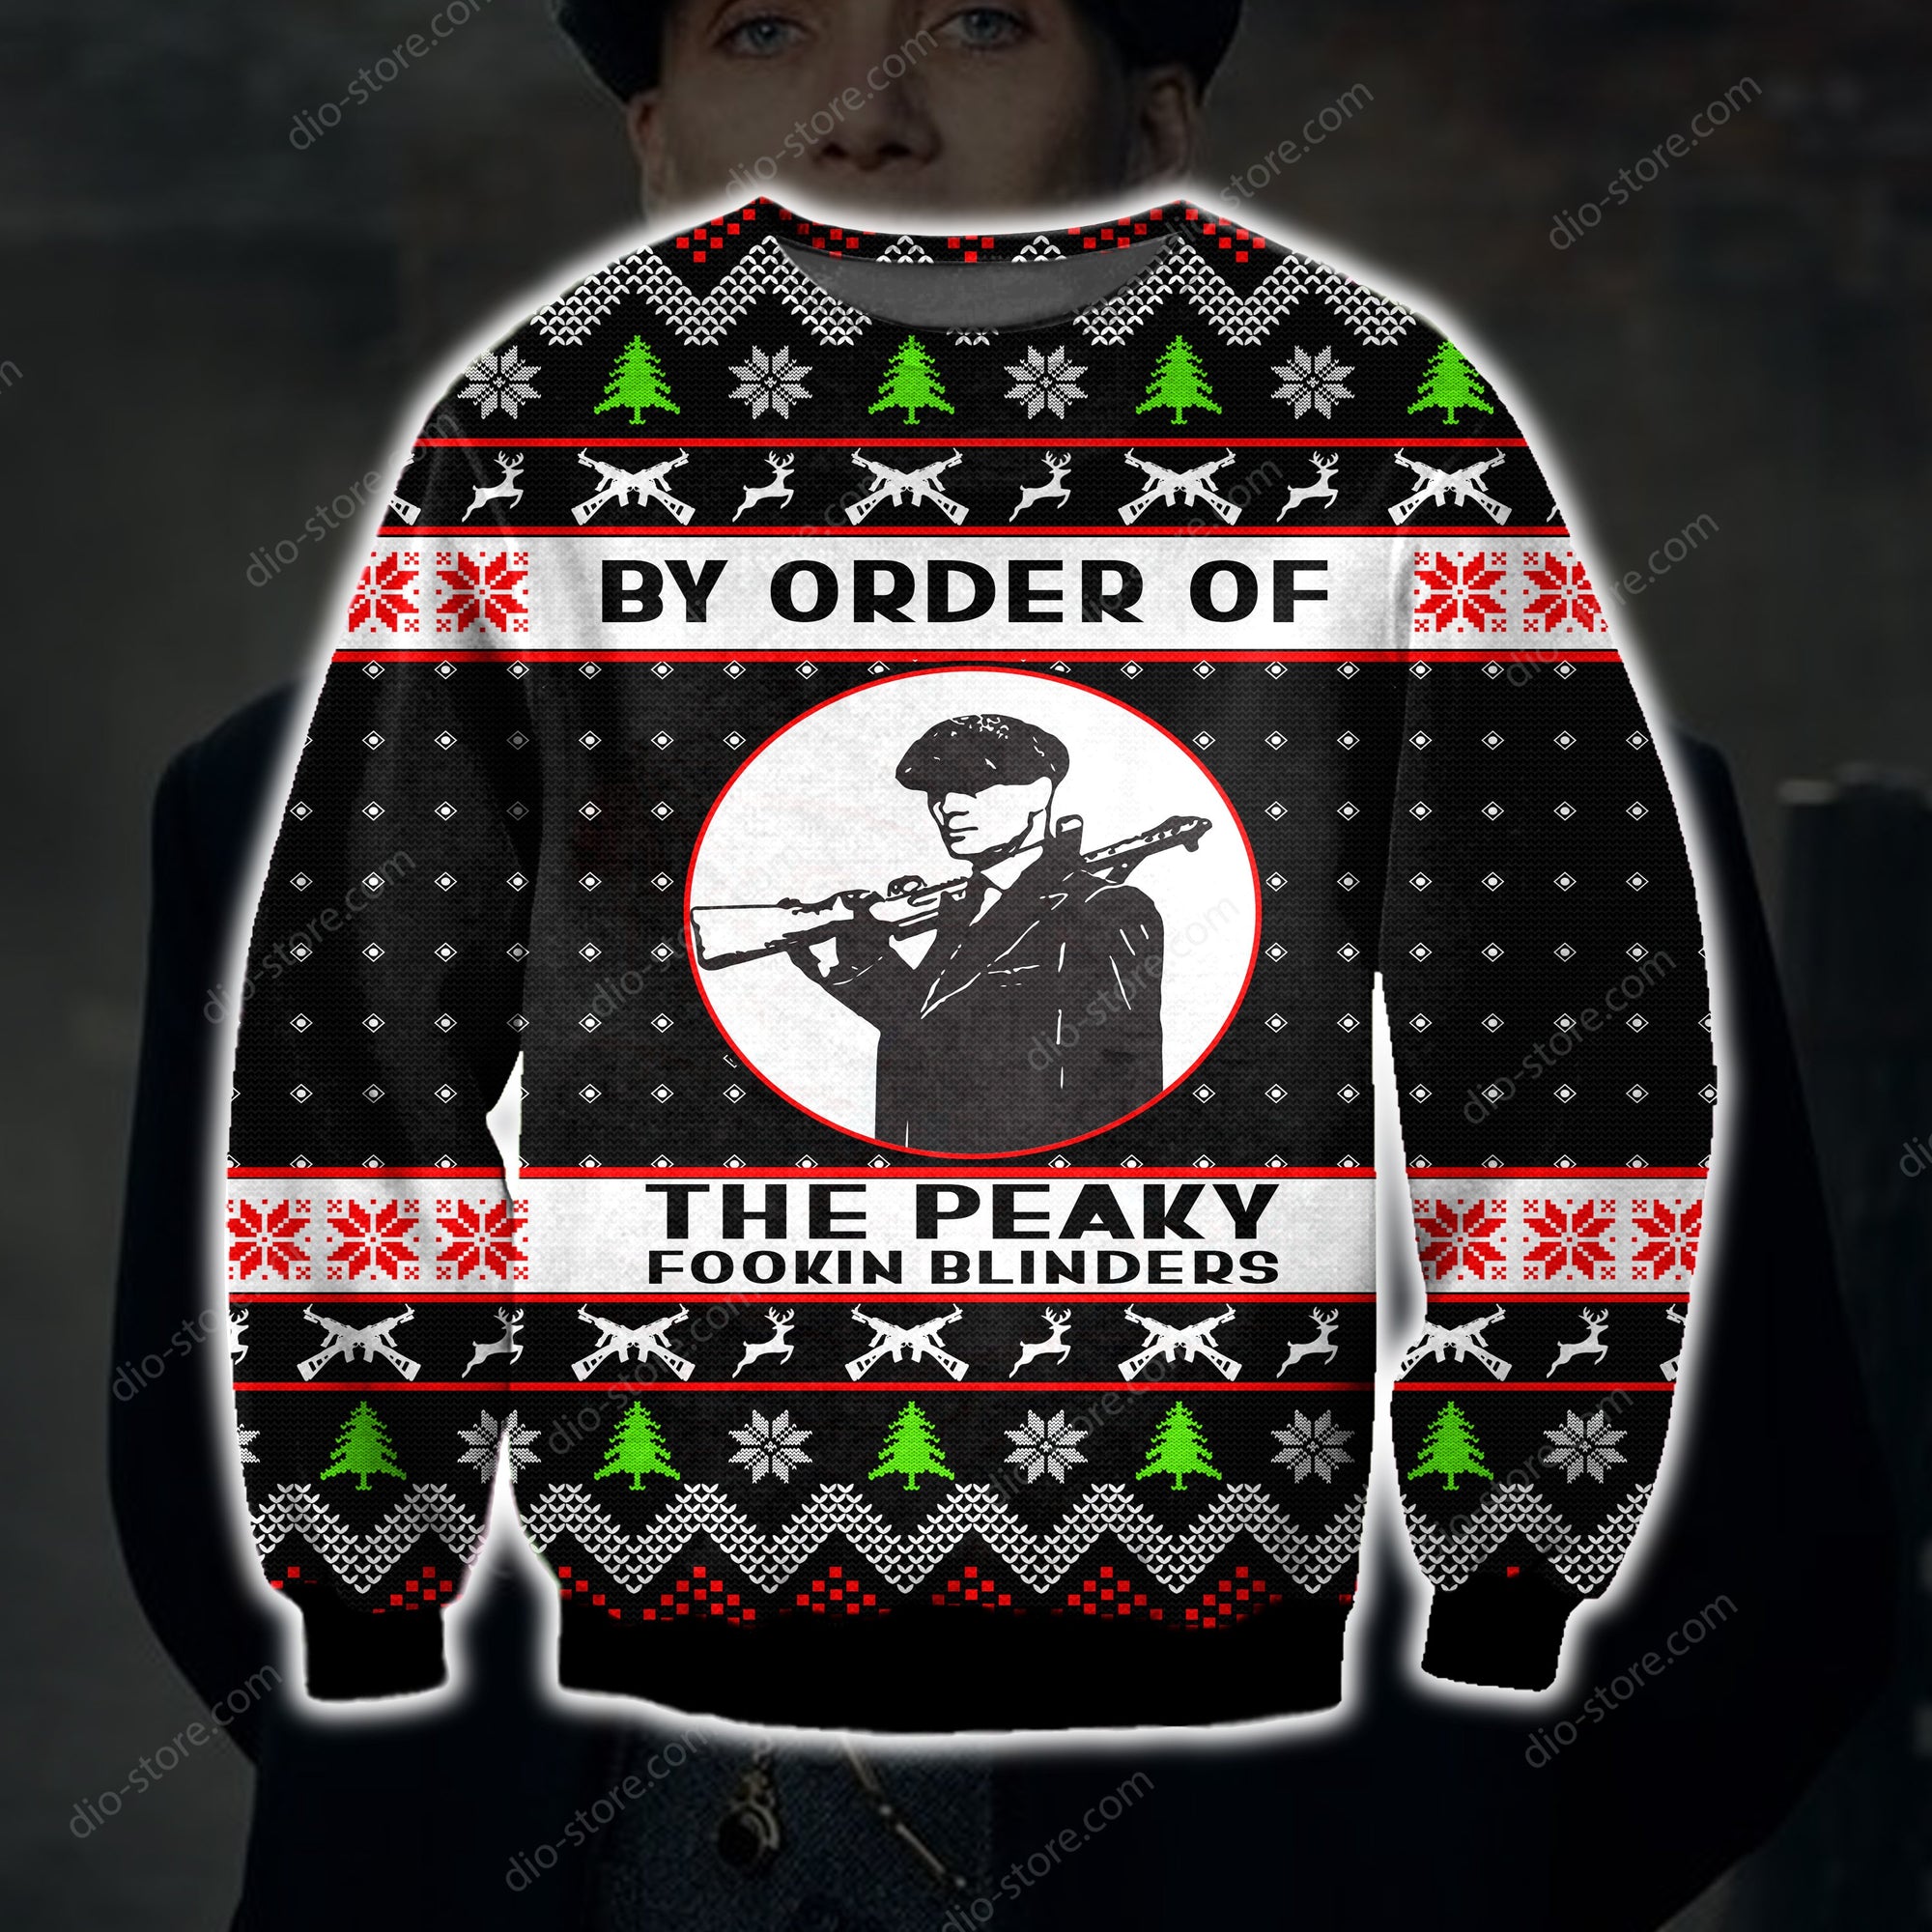 By Order Of The Peaky Blinders Knitting Pattern 3D Print Ugly Sweater Hoodie All Over Printed Cint10535